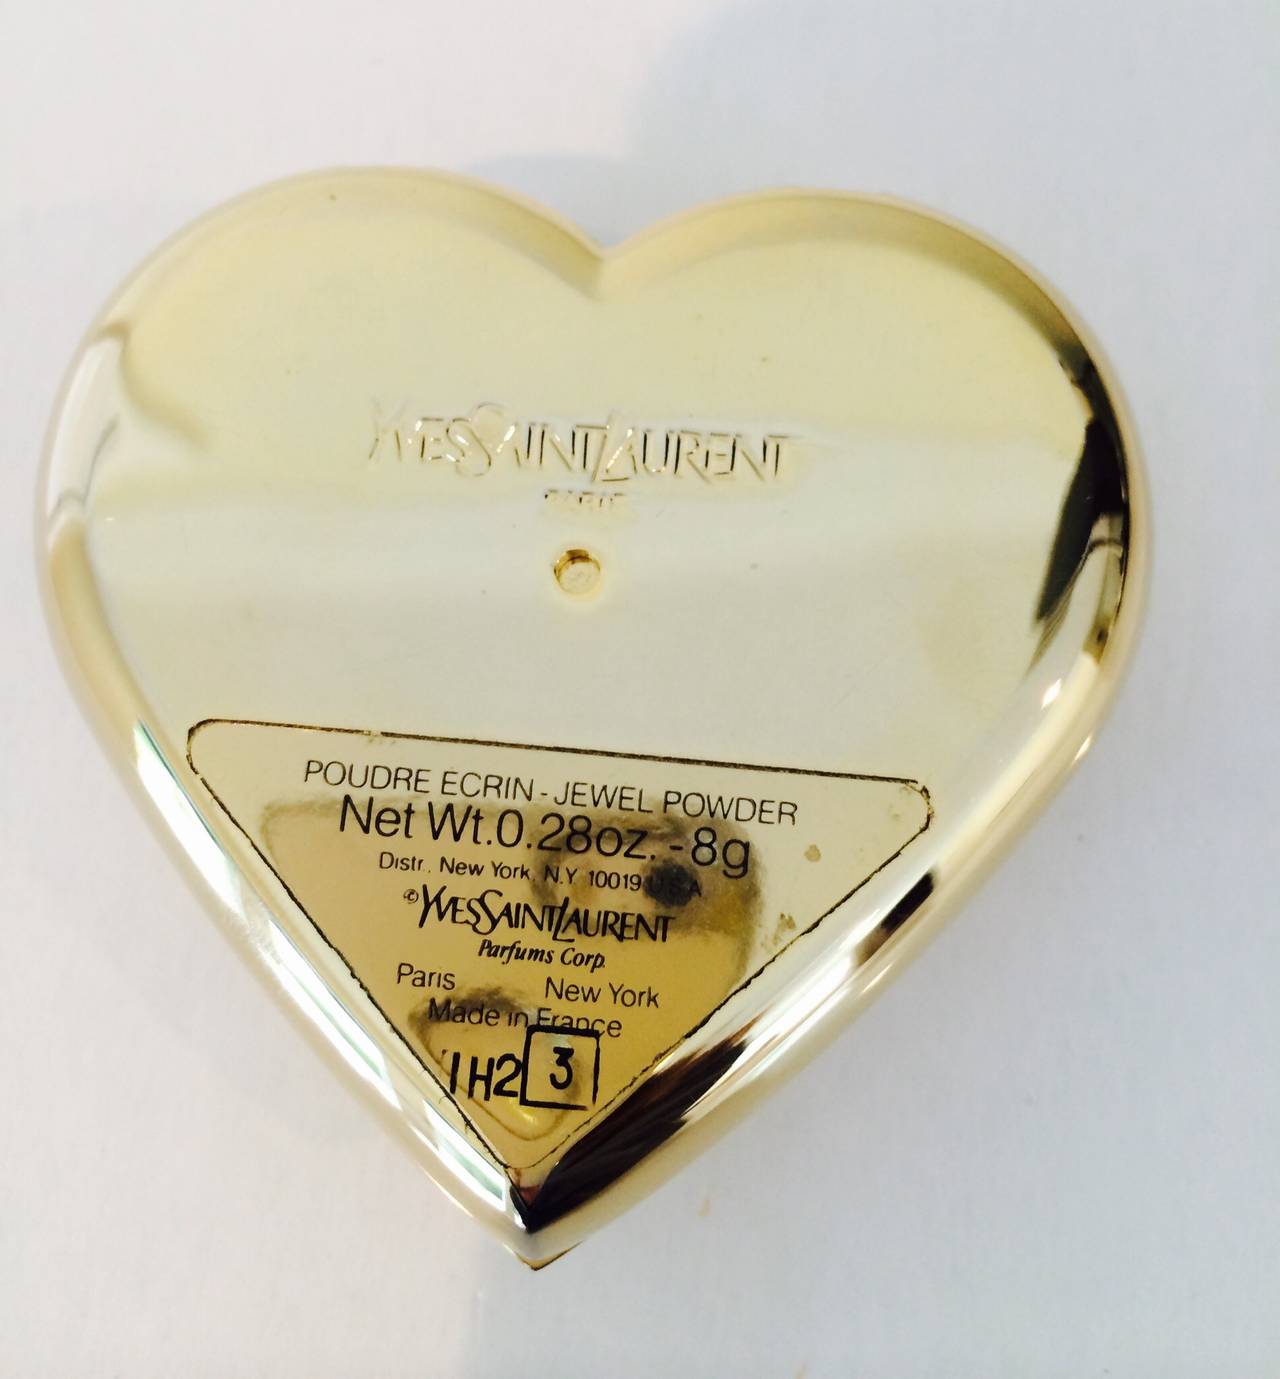 ysl compact mirror